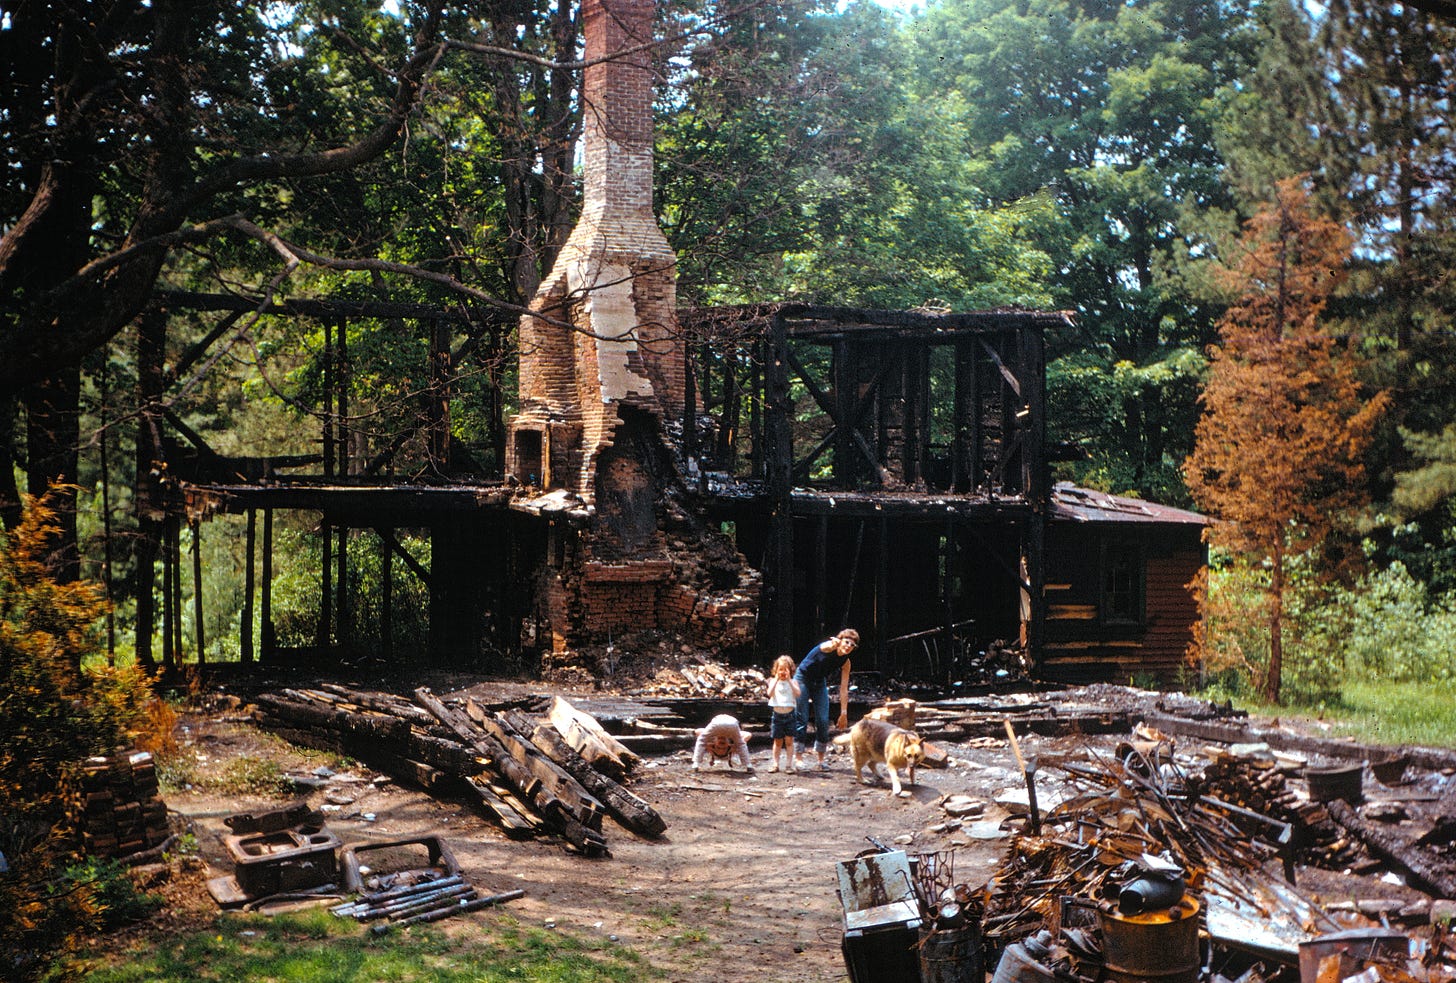 Red Pine Farm after being destroyed by a fire